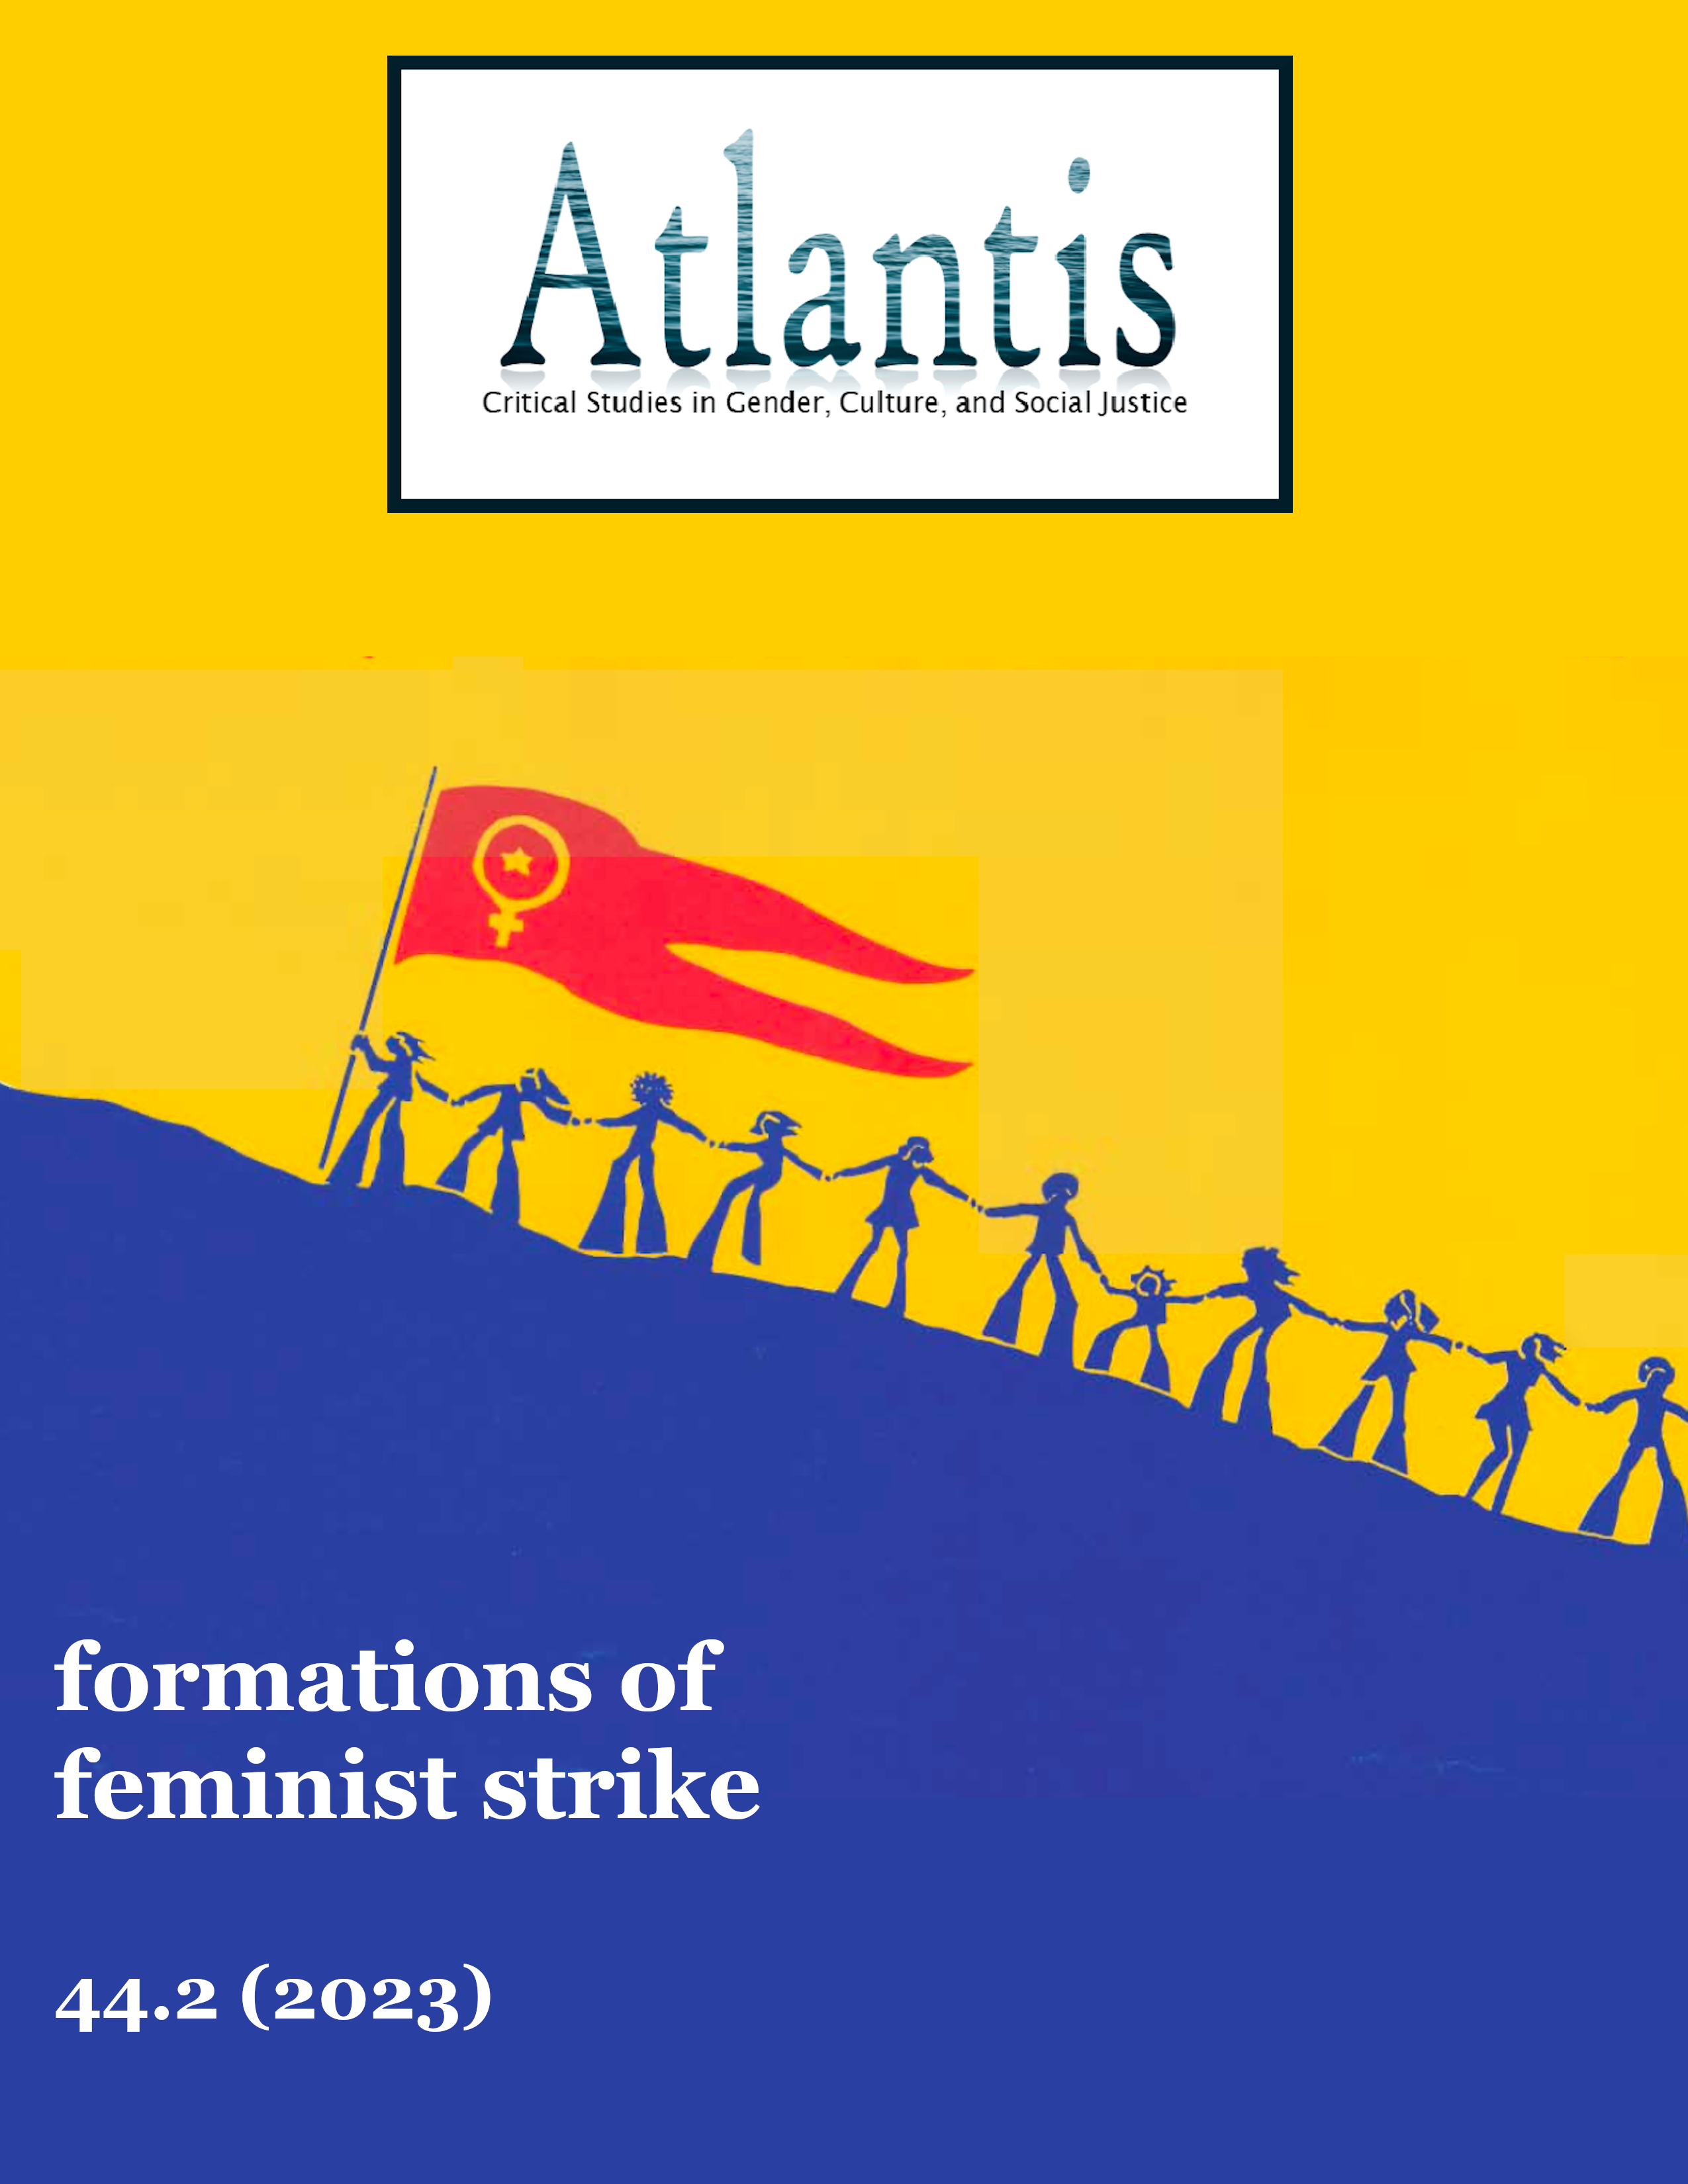 Cover image shows an illustration of bright blue figures holding hands while walking up a hill. The figure in front is holding a red flag with the symbol for "woman" on it (circle with cross beneath). The background behind the figures is bright yellow.